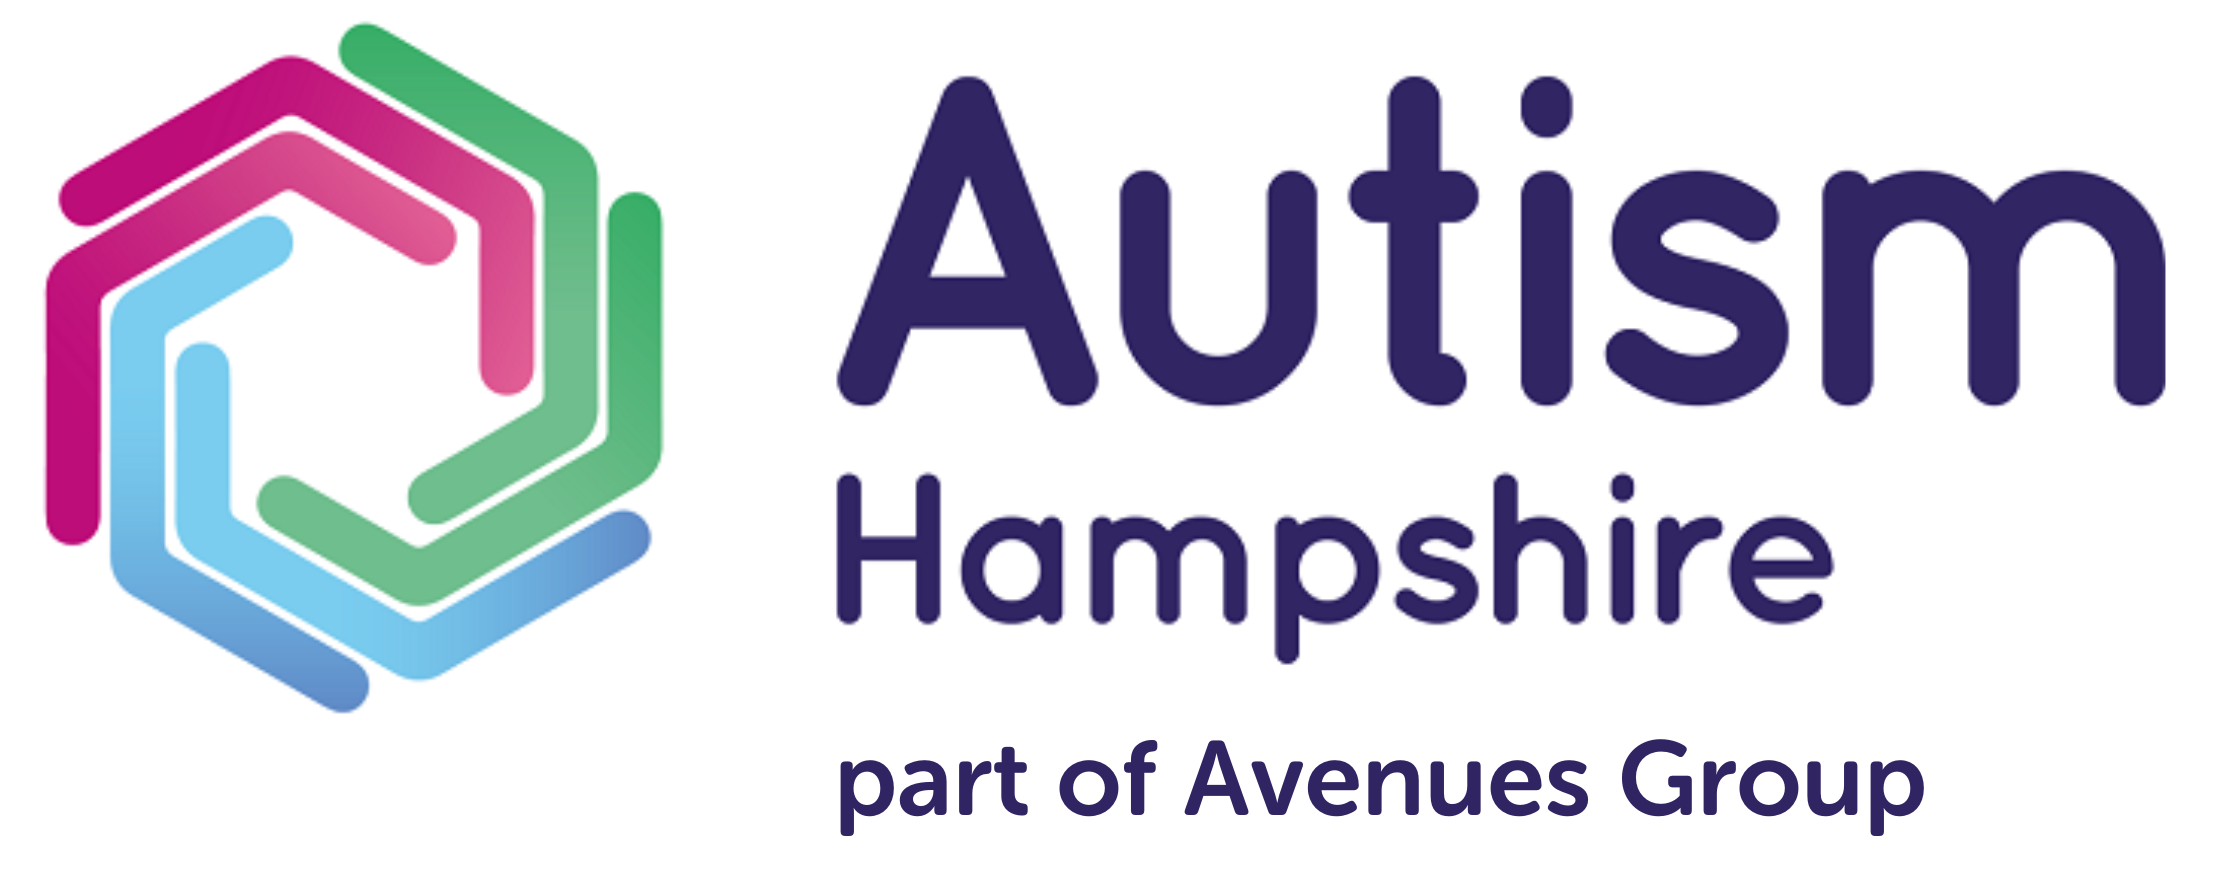 Autism Hampshire logo with Avenues Group”>
				</a>
			</div>
			<div class=